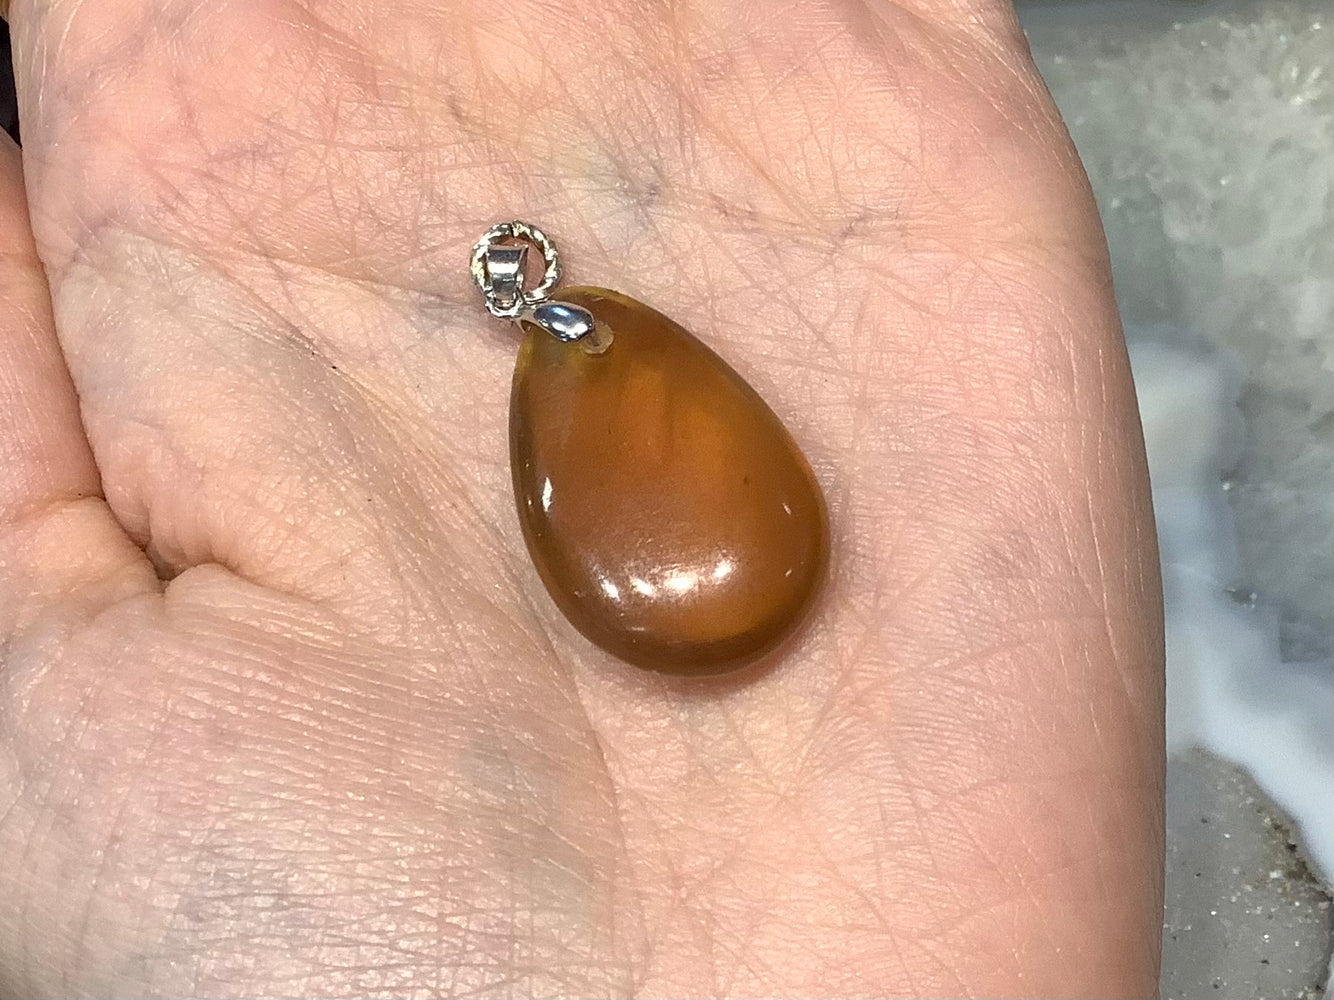 Natural Sumatra blue amber pendant #1 from Indonesia